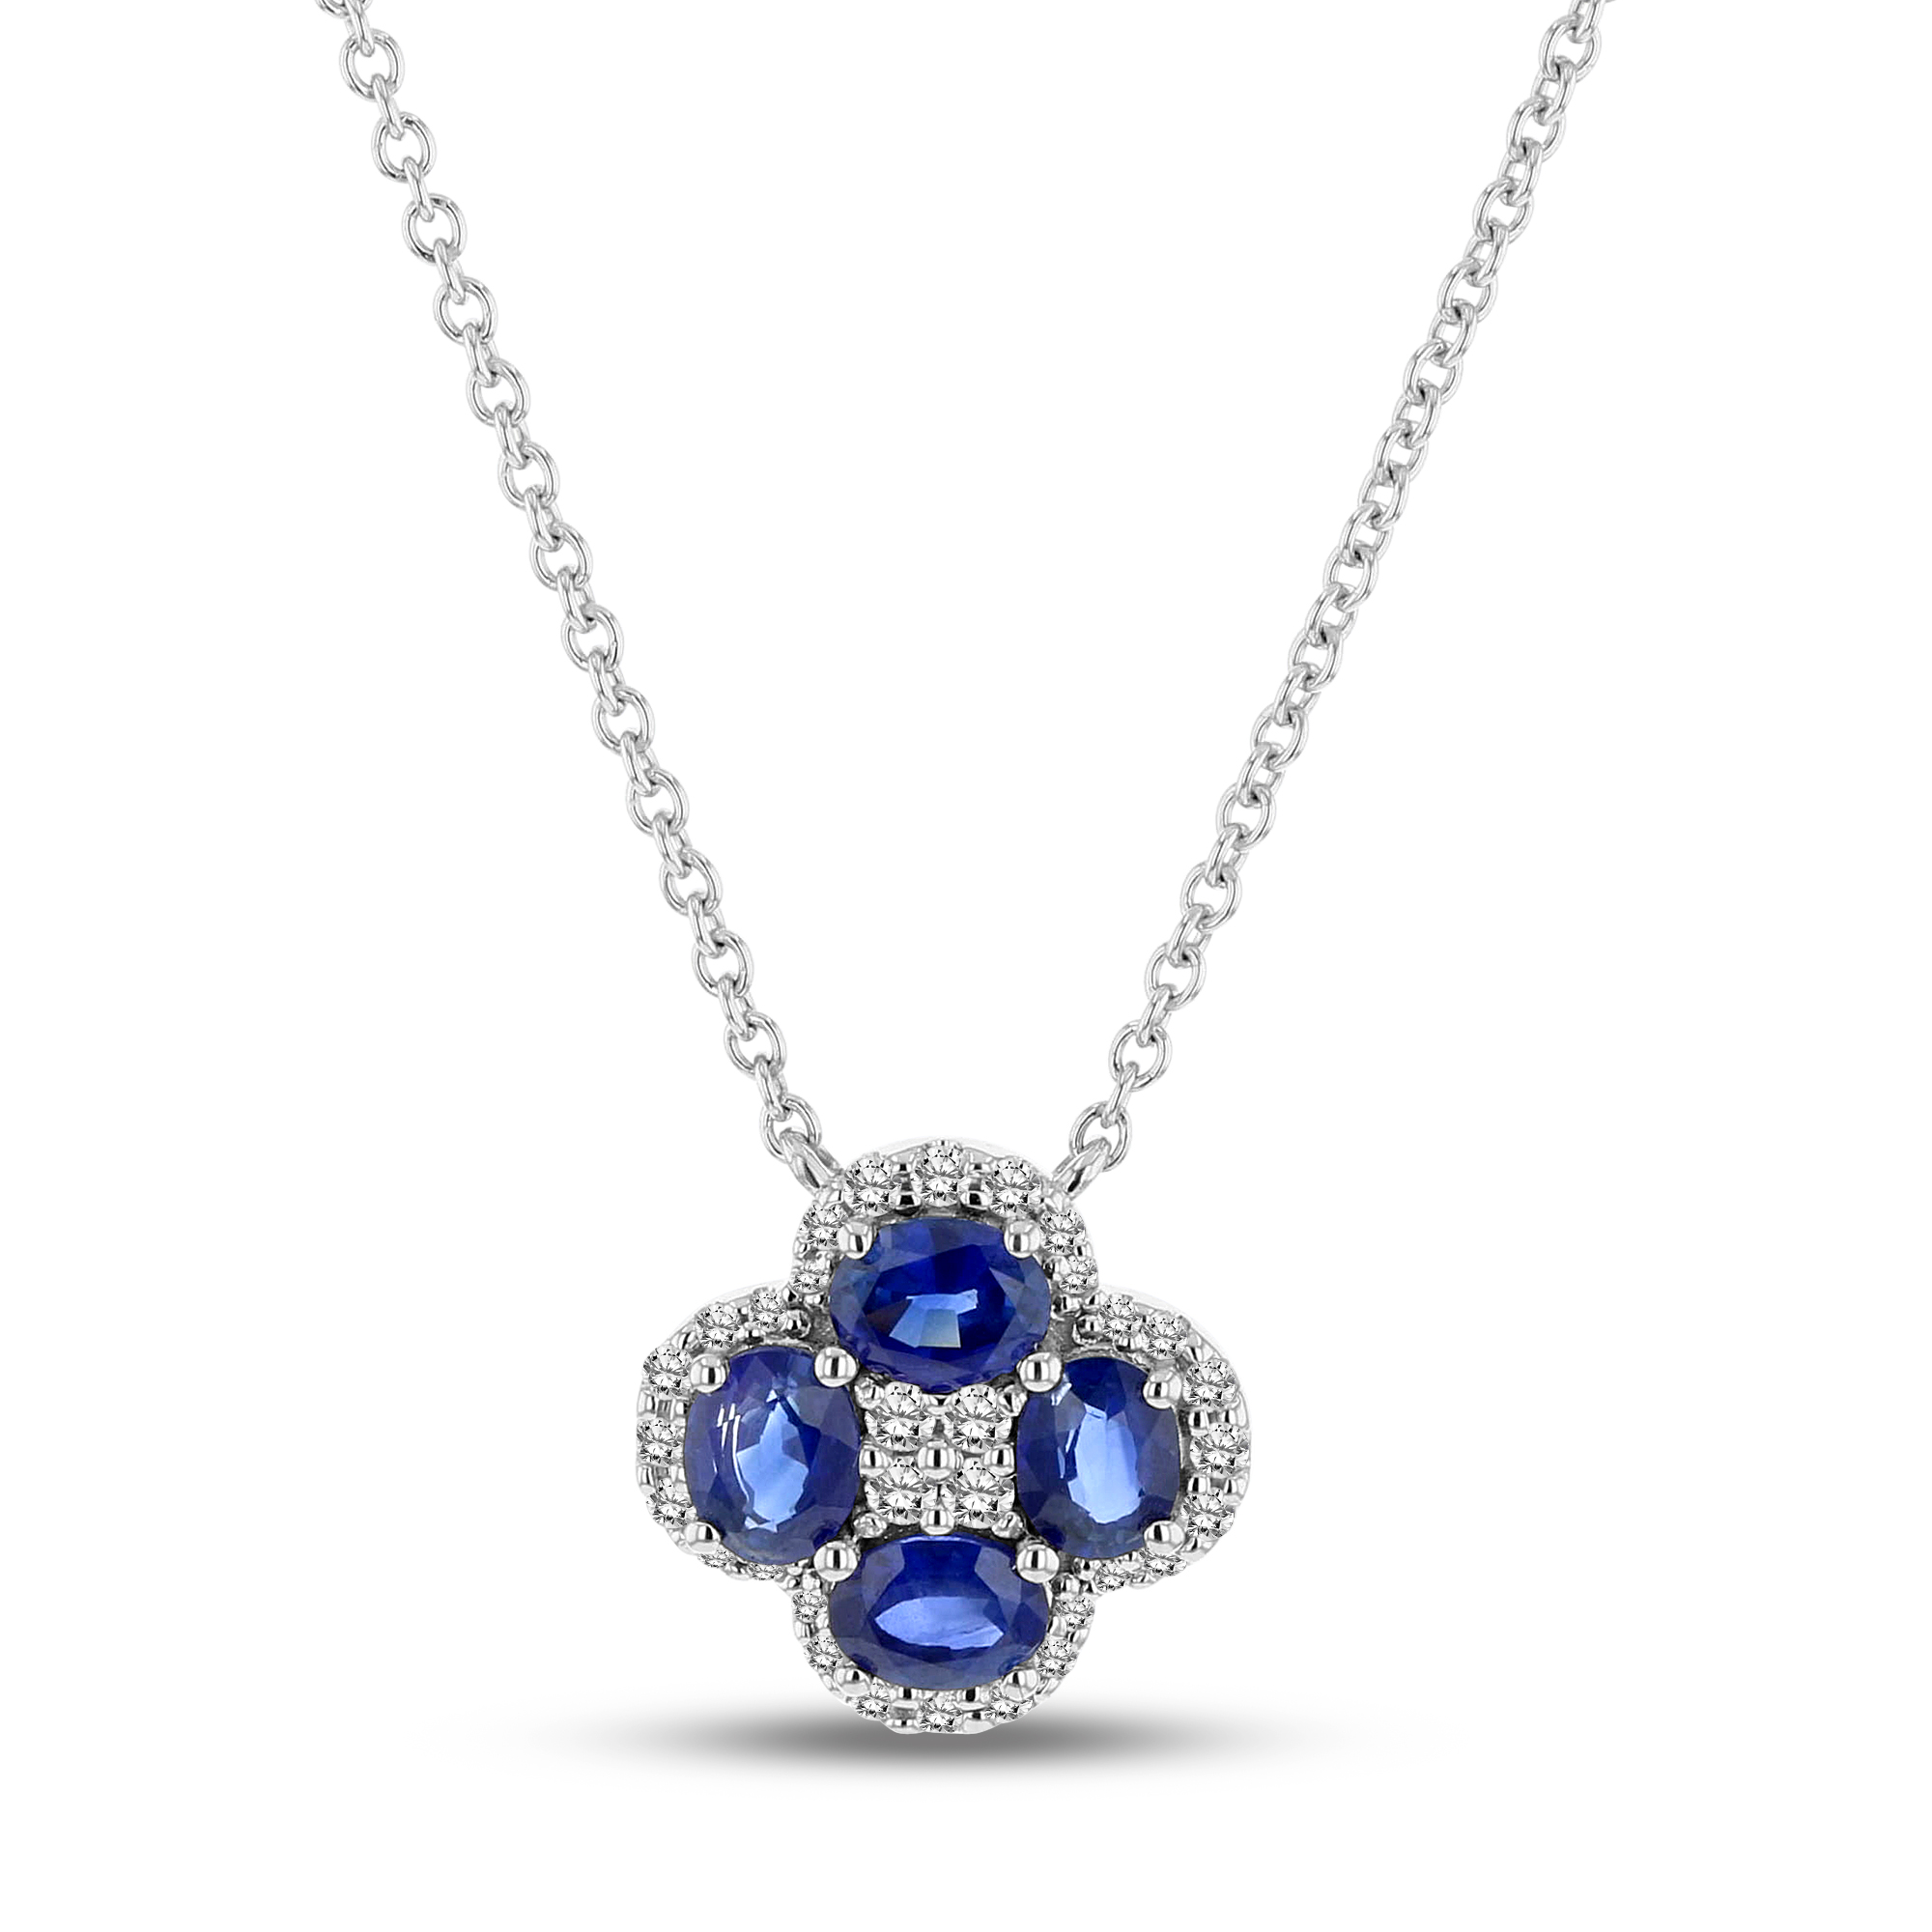 View 0.13ctw Diamond and Sapphire Clober Pendant in 18k White Gold